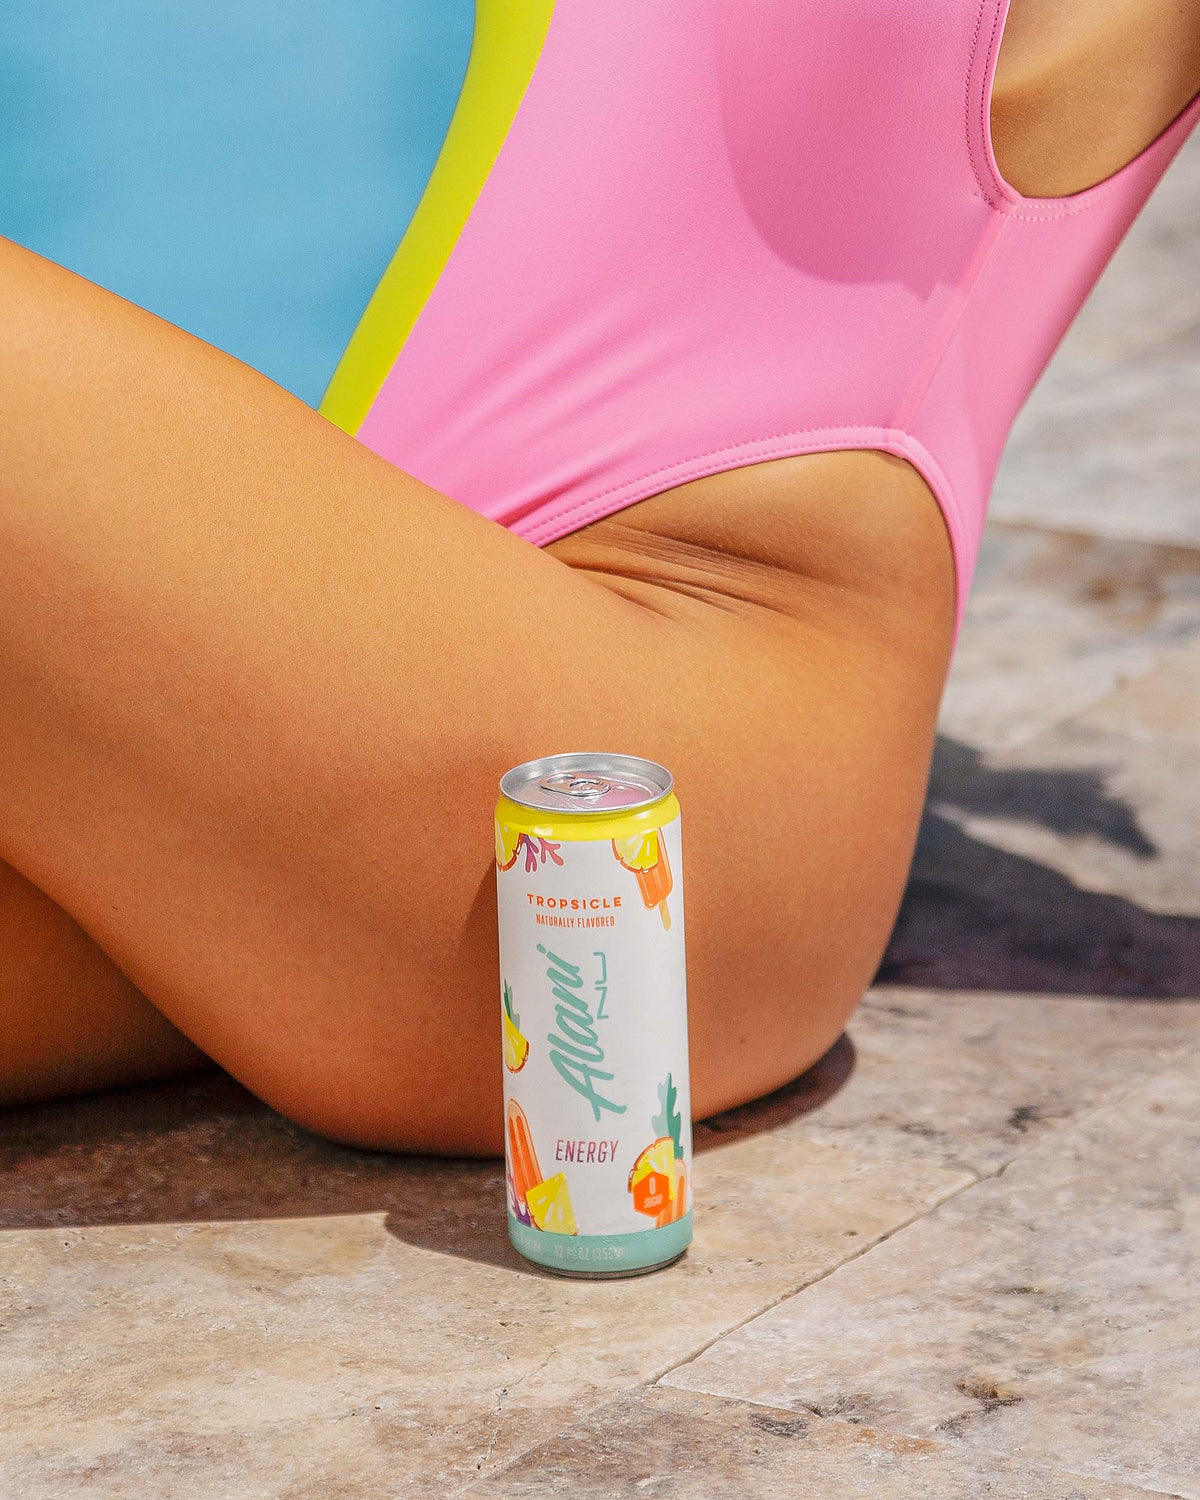 A woman in a pink bathing suit sitting next to an energy drink can in Tropsicle flavor.